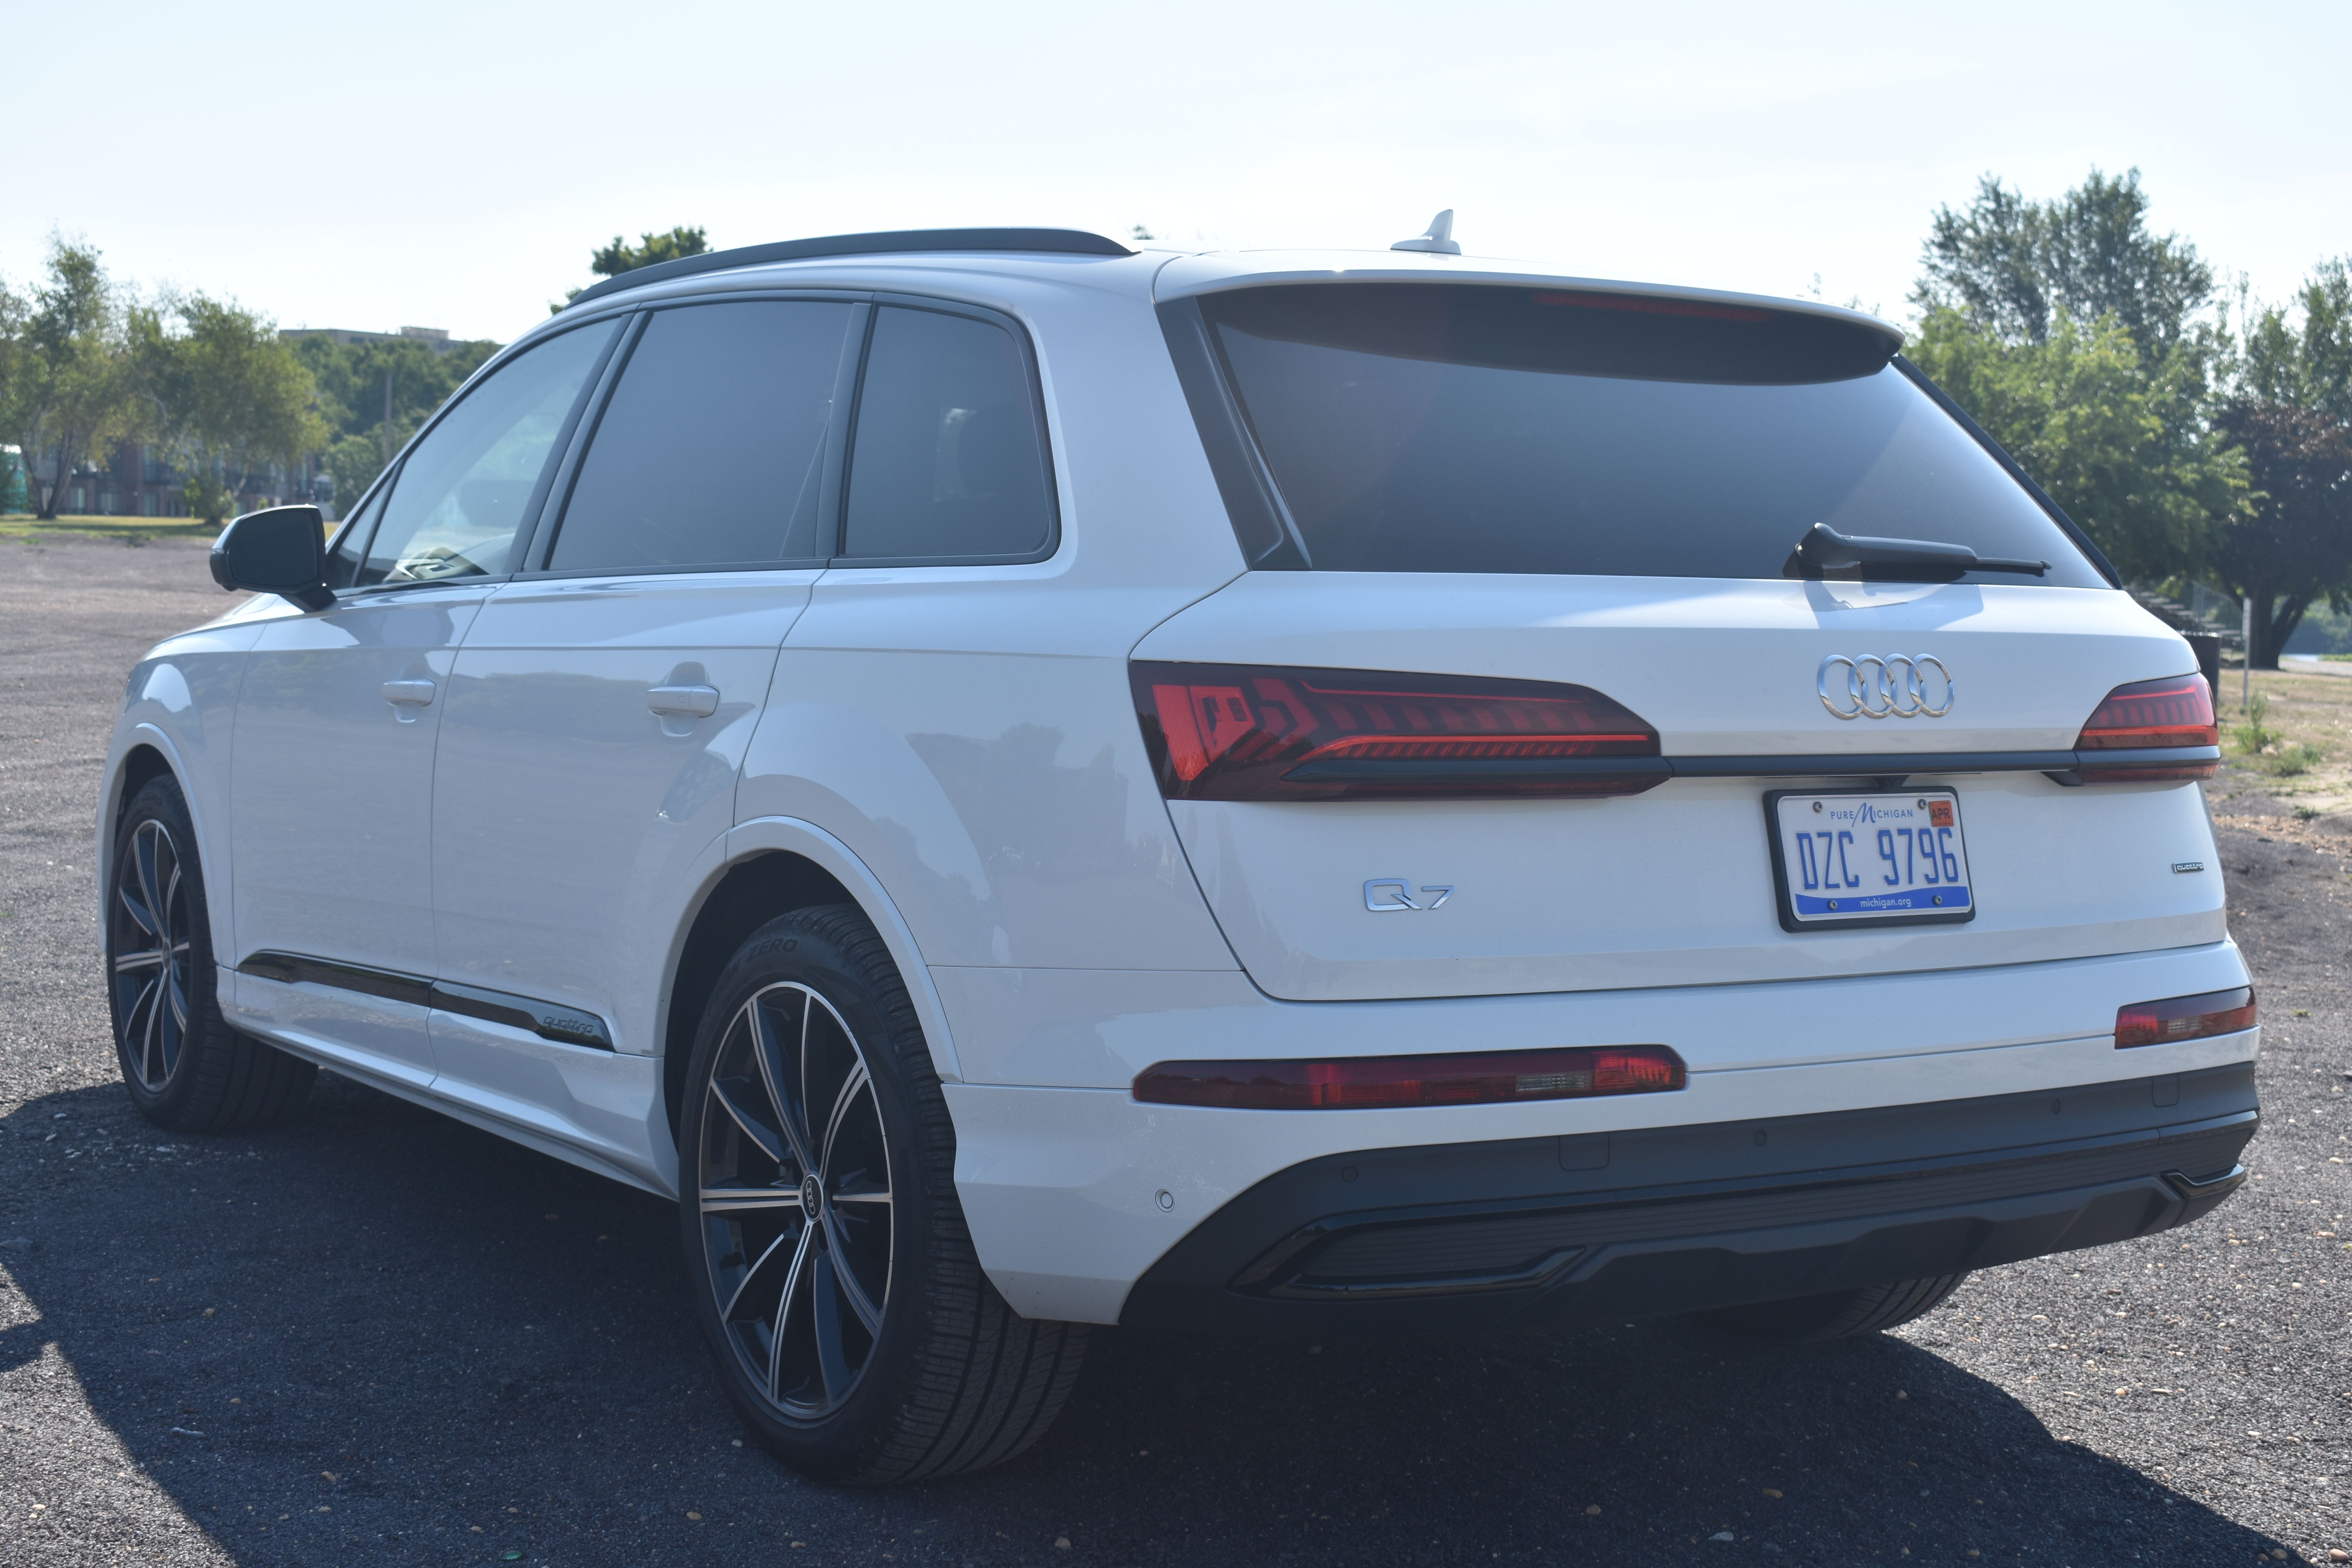 2022 Audi Q7 Review: The Luxury SUV For The Frivolous Family